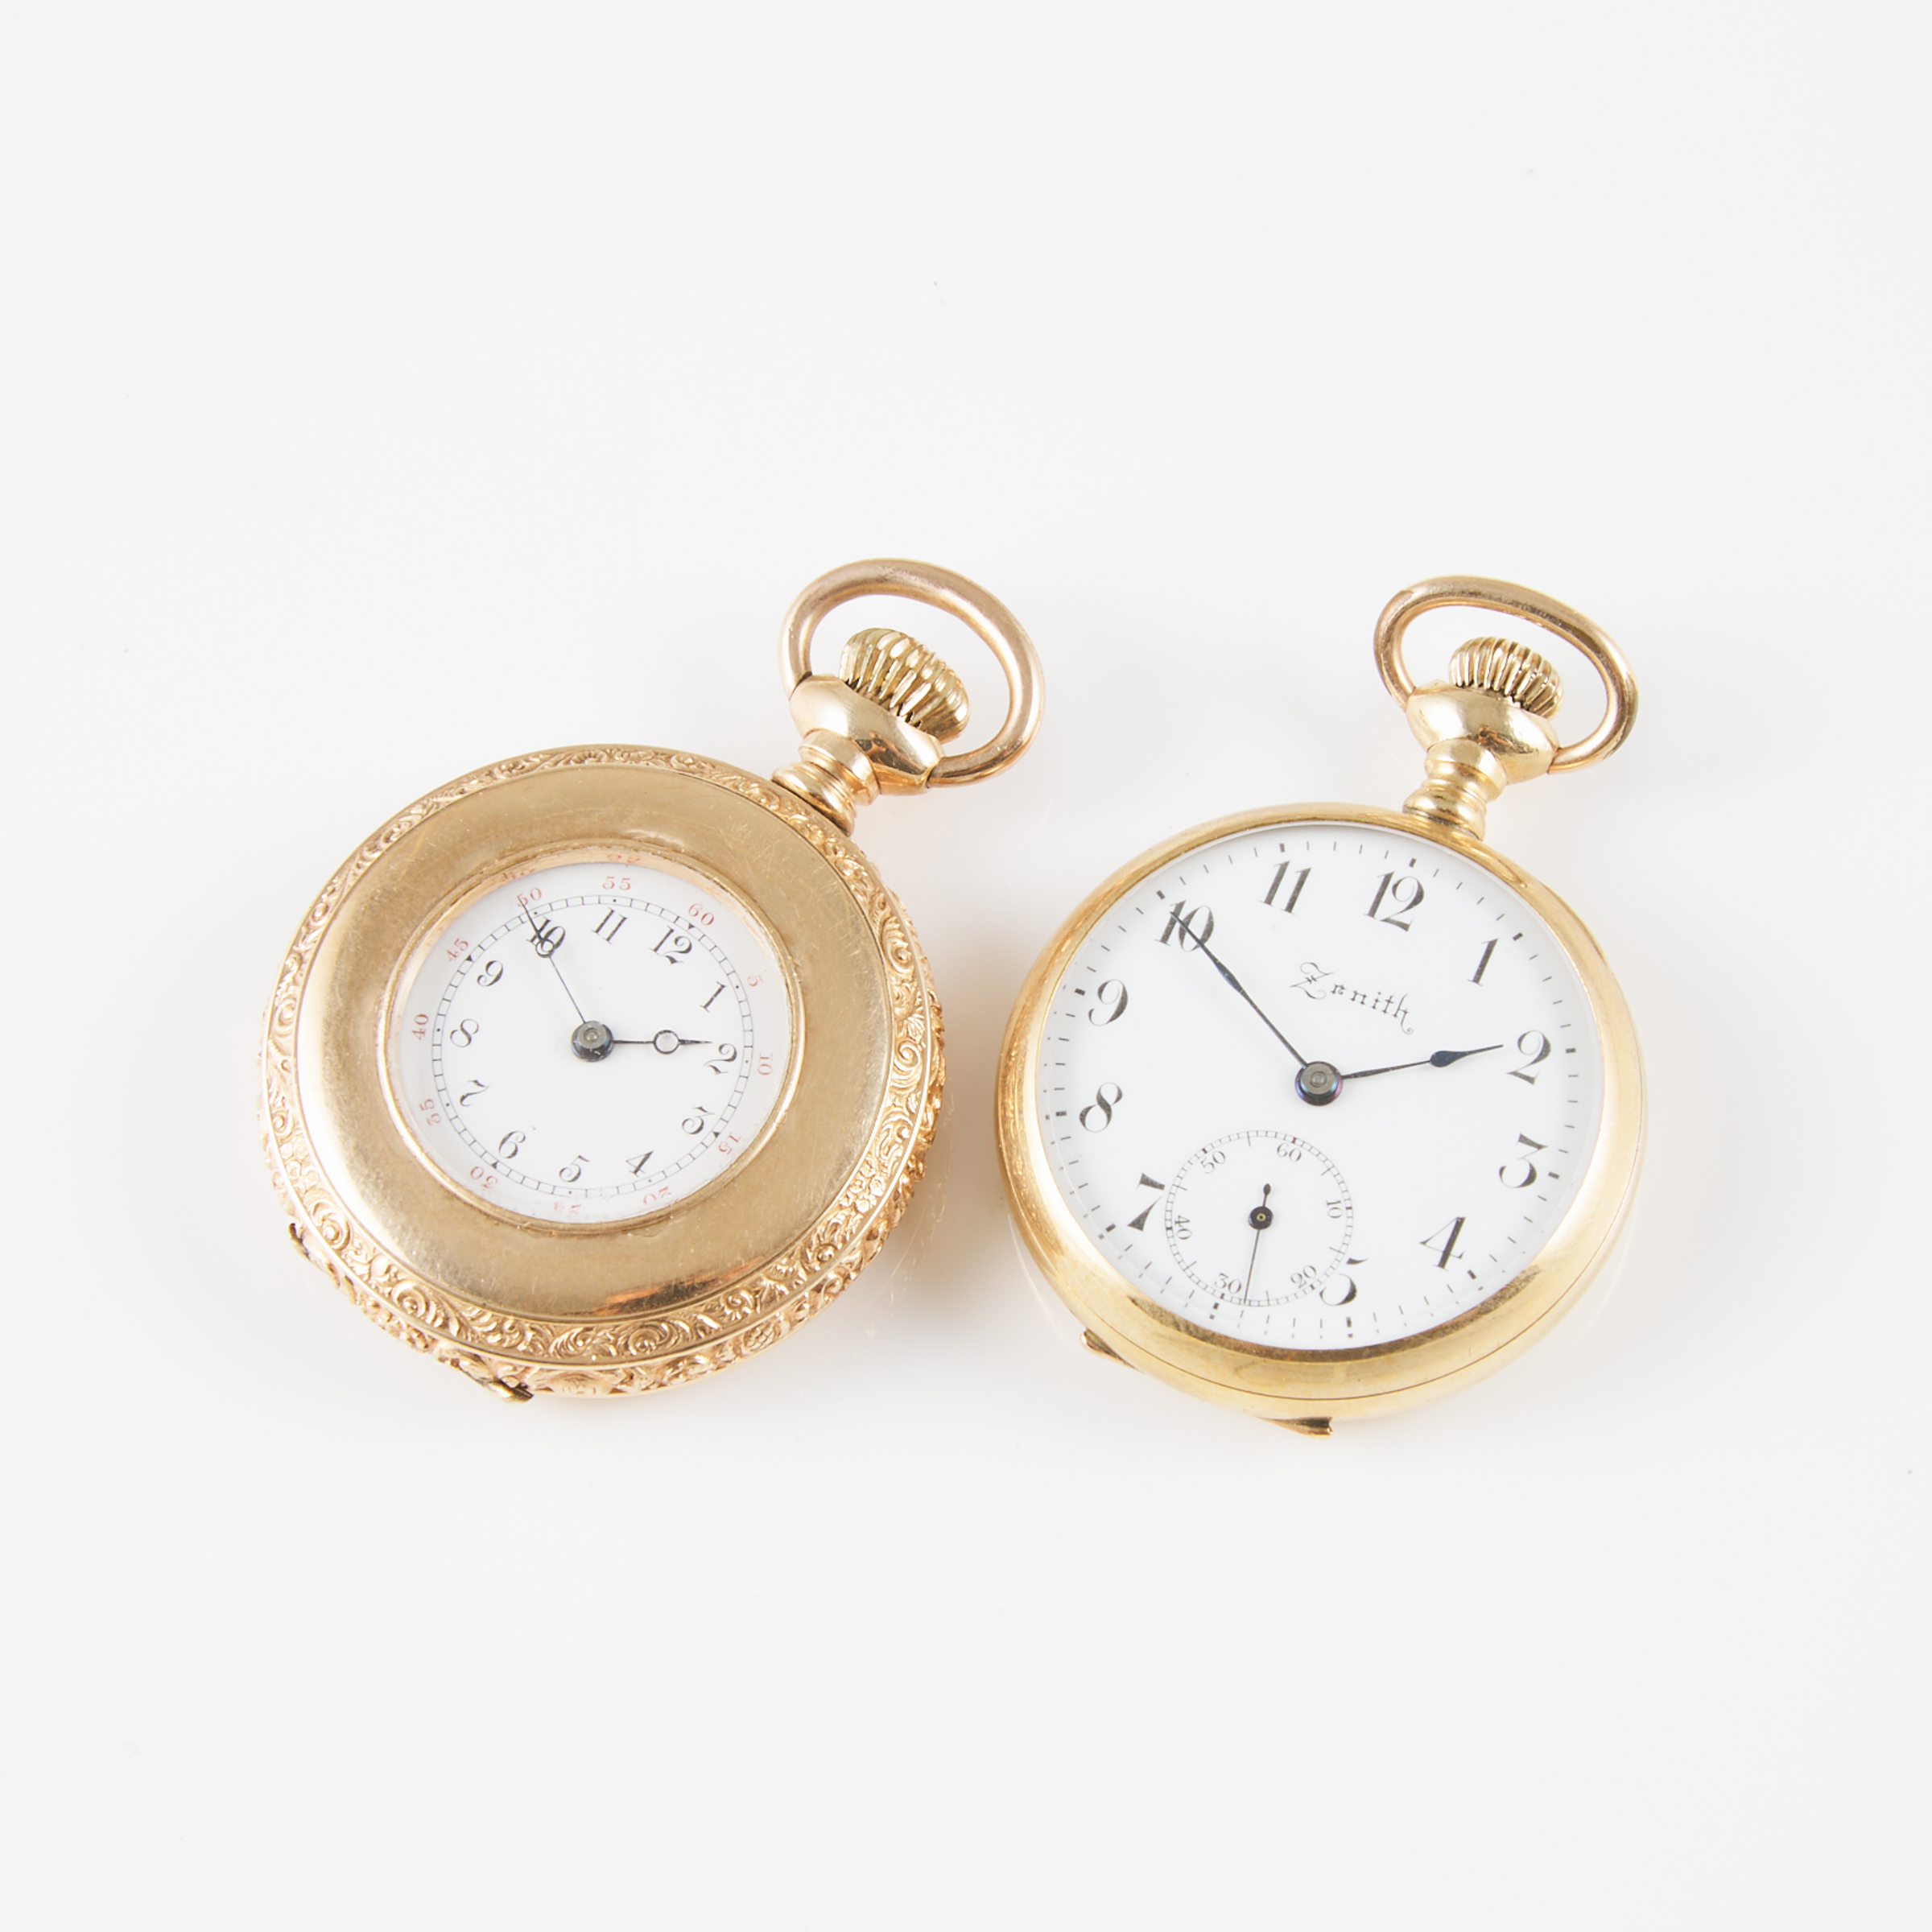 2 Lady's Pocket Watches